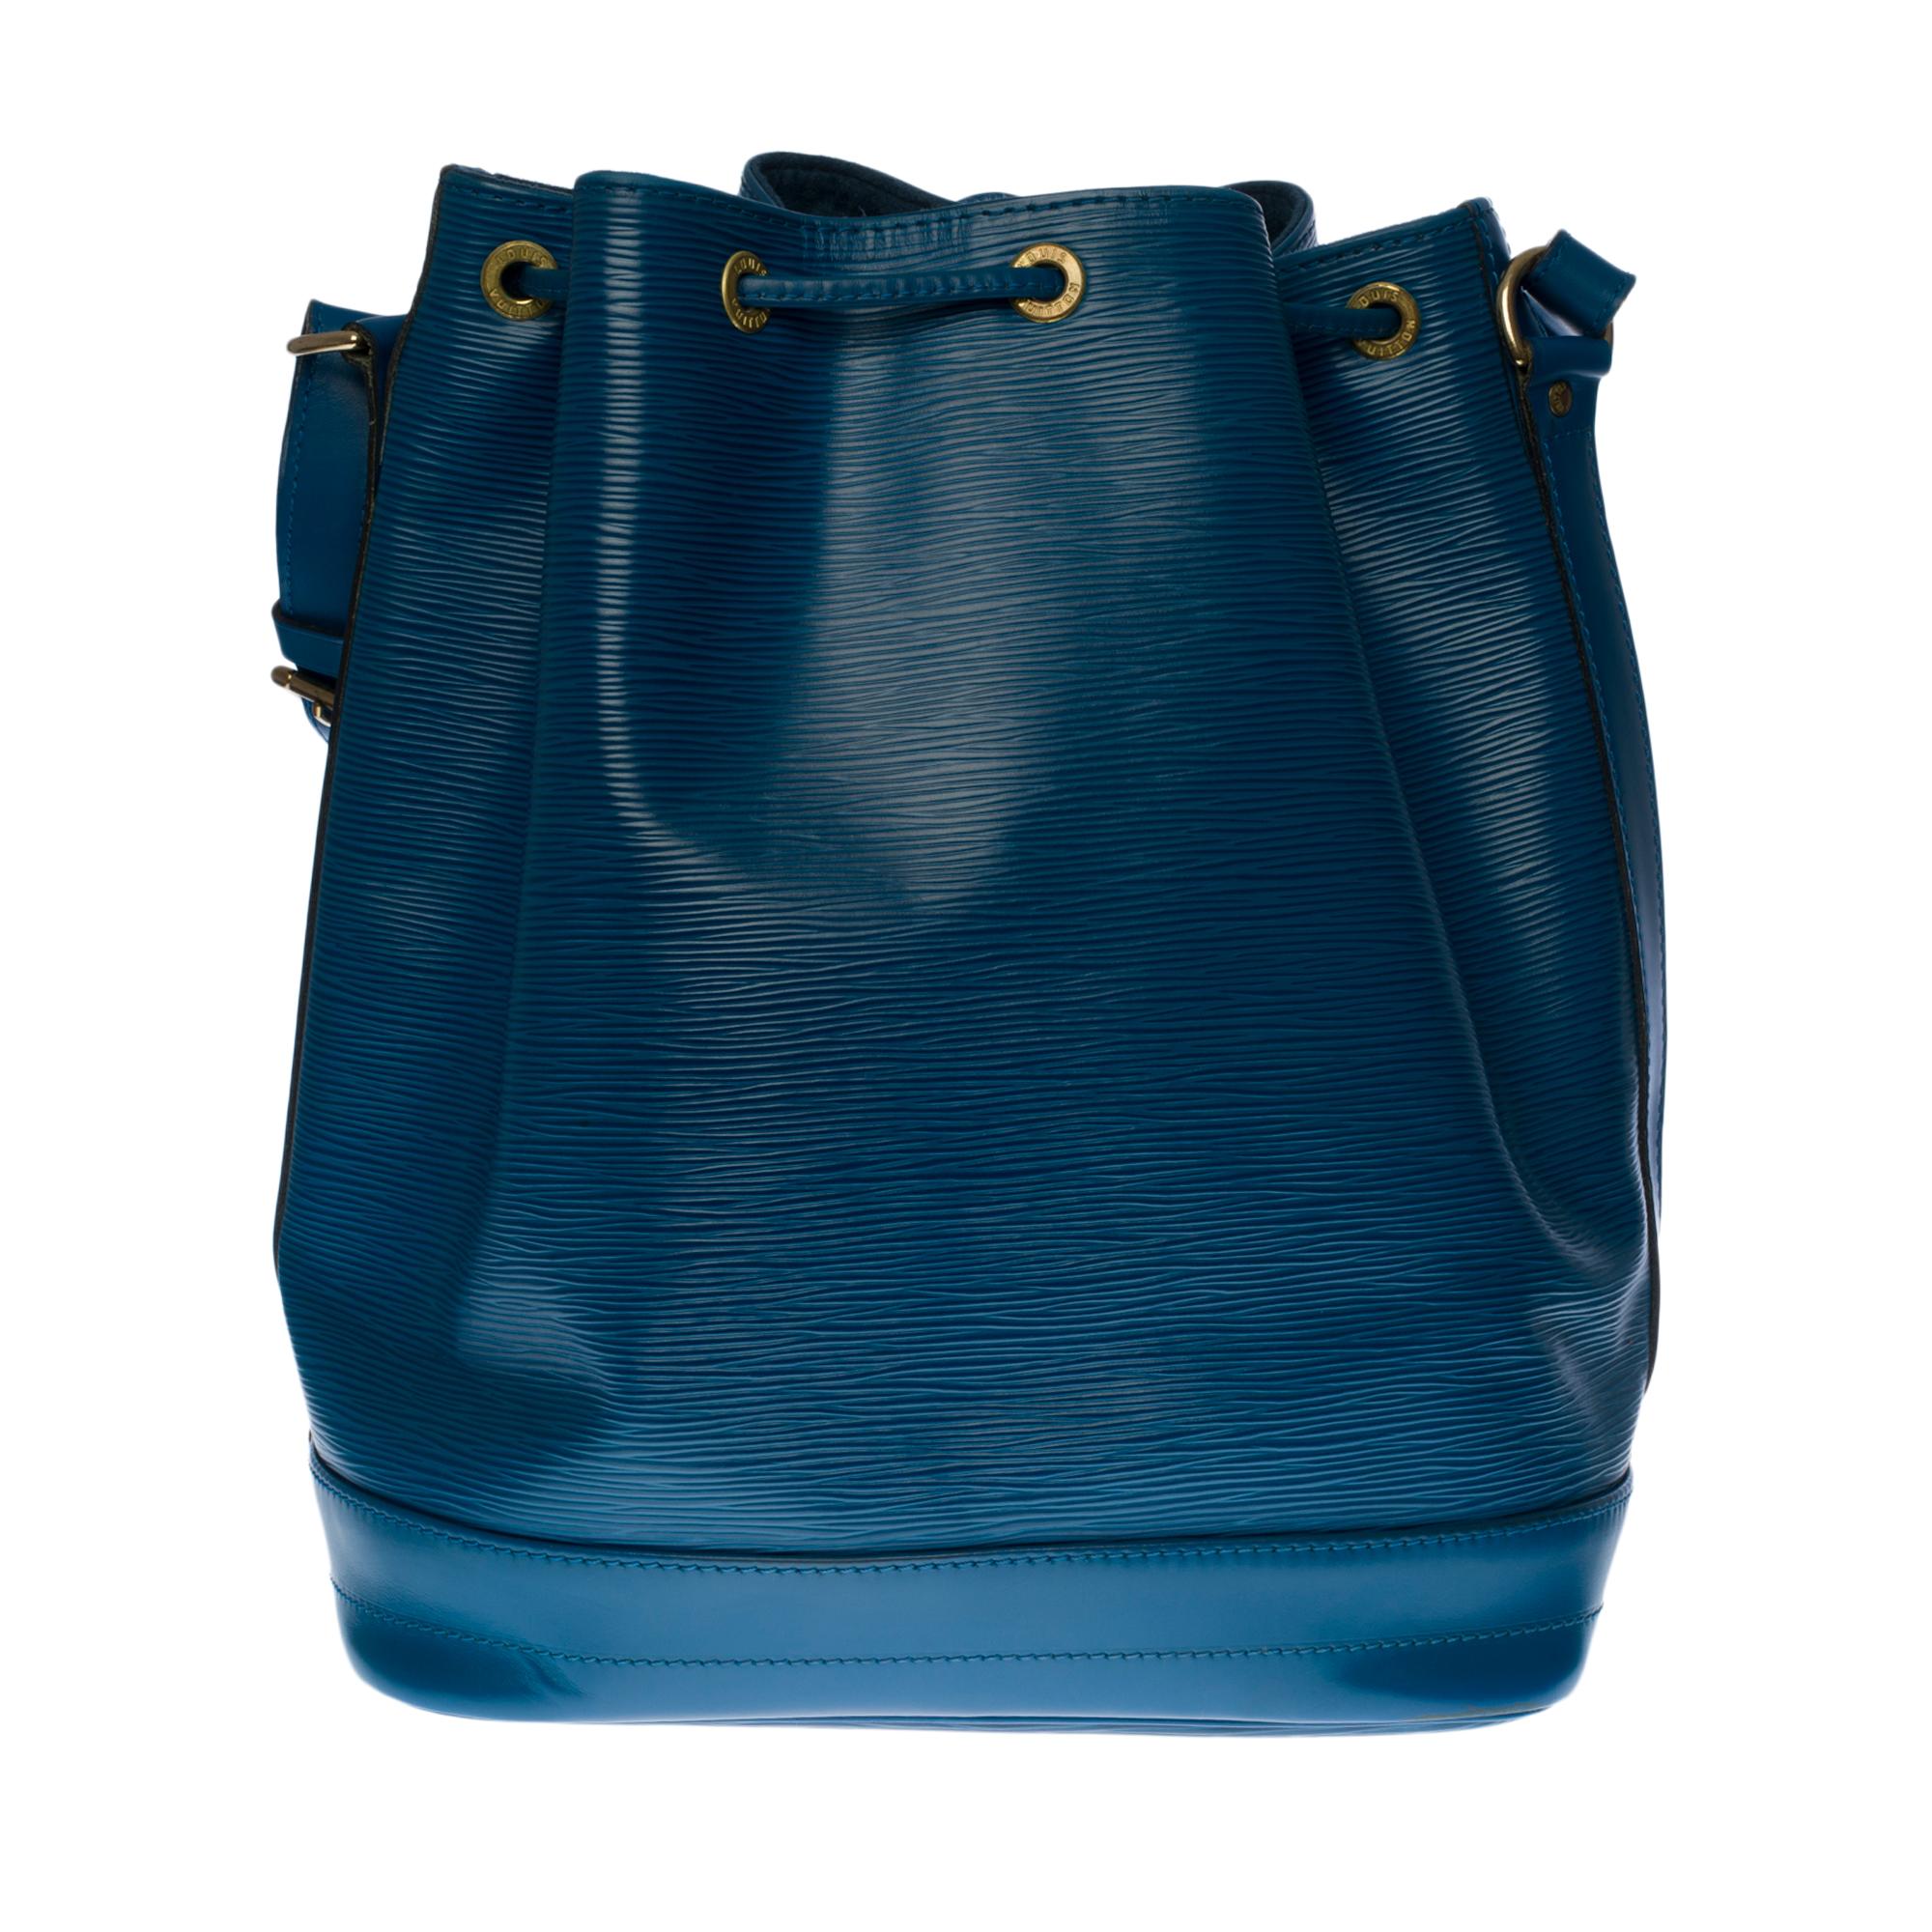 
The Essential Louis Vuitton Grand Noé handbag in blue epi leather with gold metal hardware, a simple adjustable handle in blue leather allowing a hand or shoulder support.
Leather tie closure.
Lining in blue suedine.
Signature: 